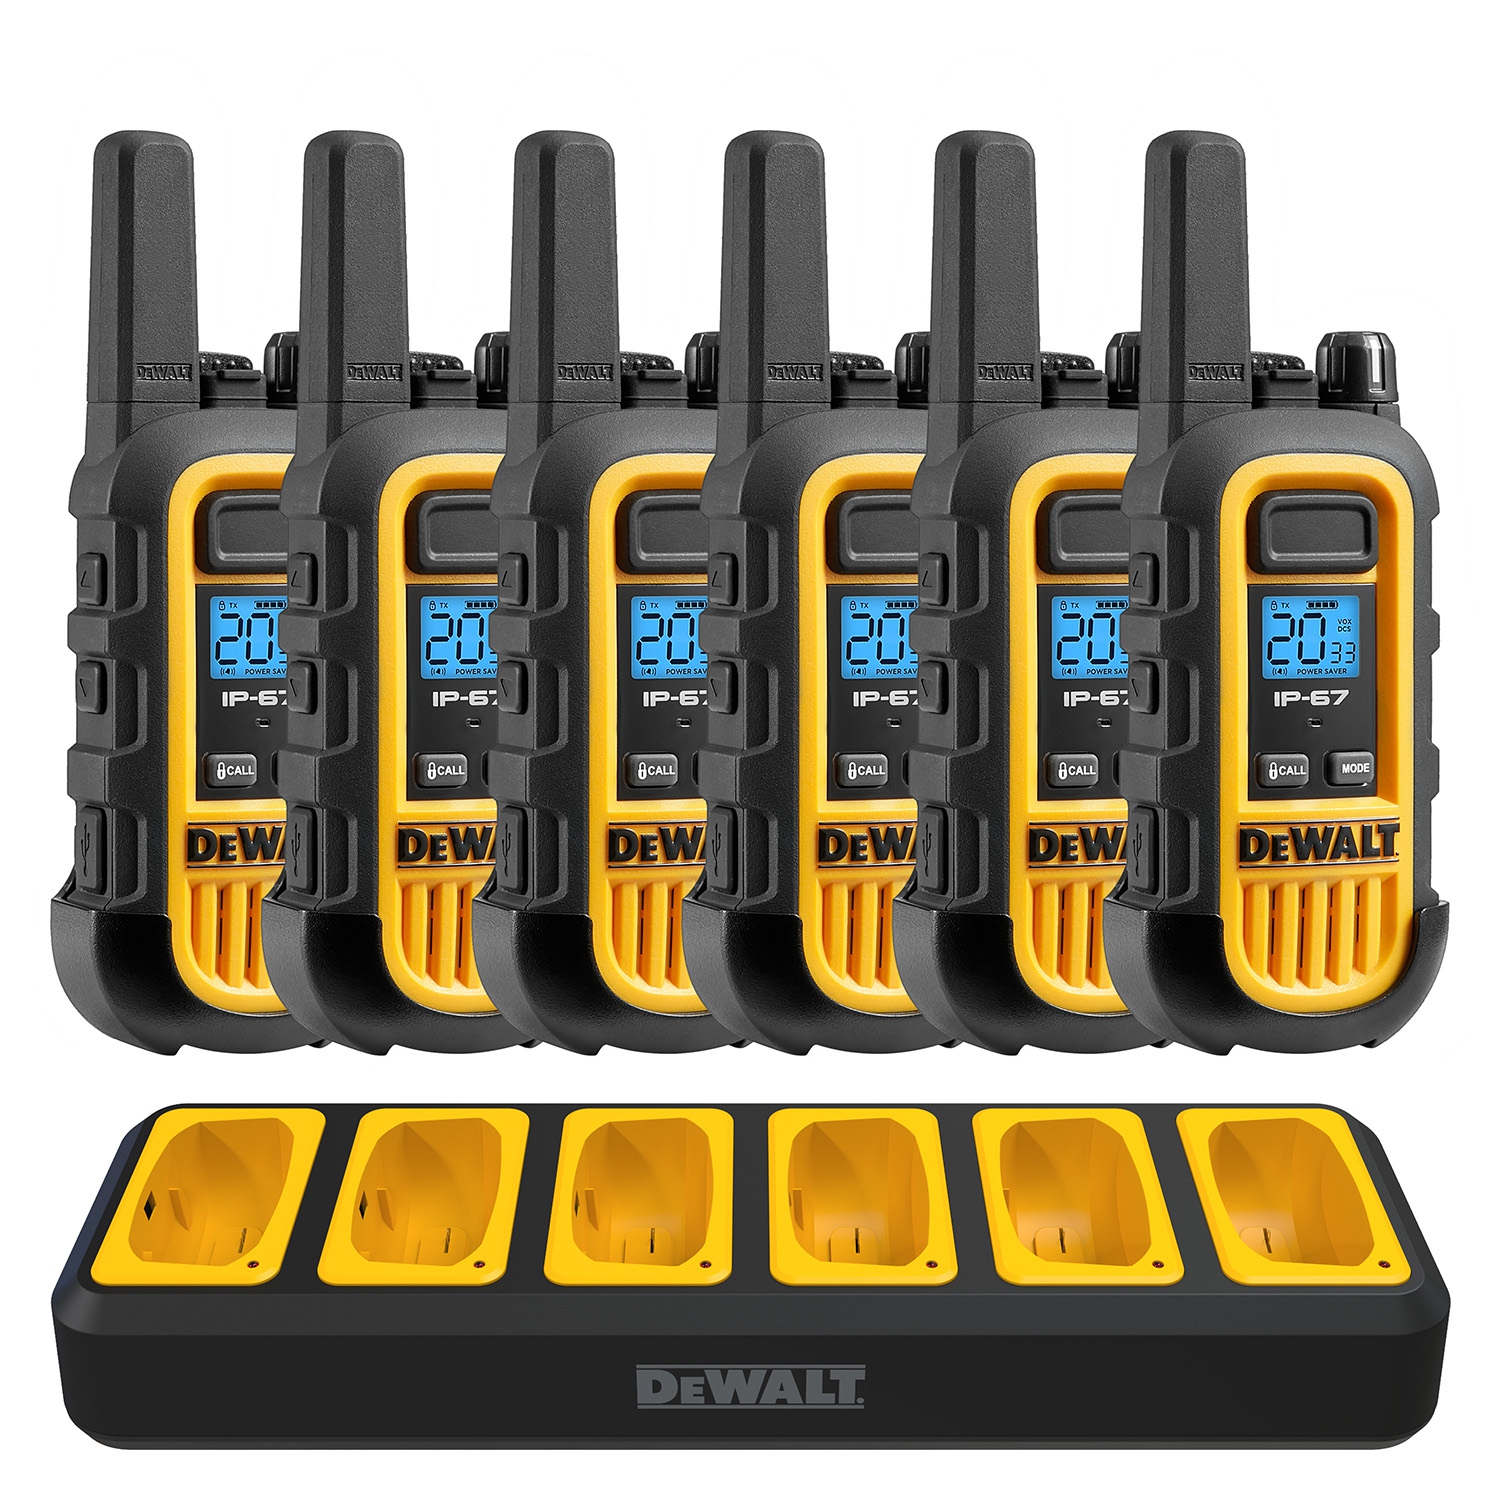 DeWalt DXFRS300-BCH6 B (13151112) Heavy Duty 6 - DXFRS300 Radios with 6 Port Charger